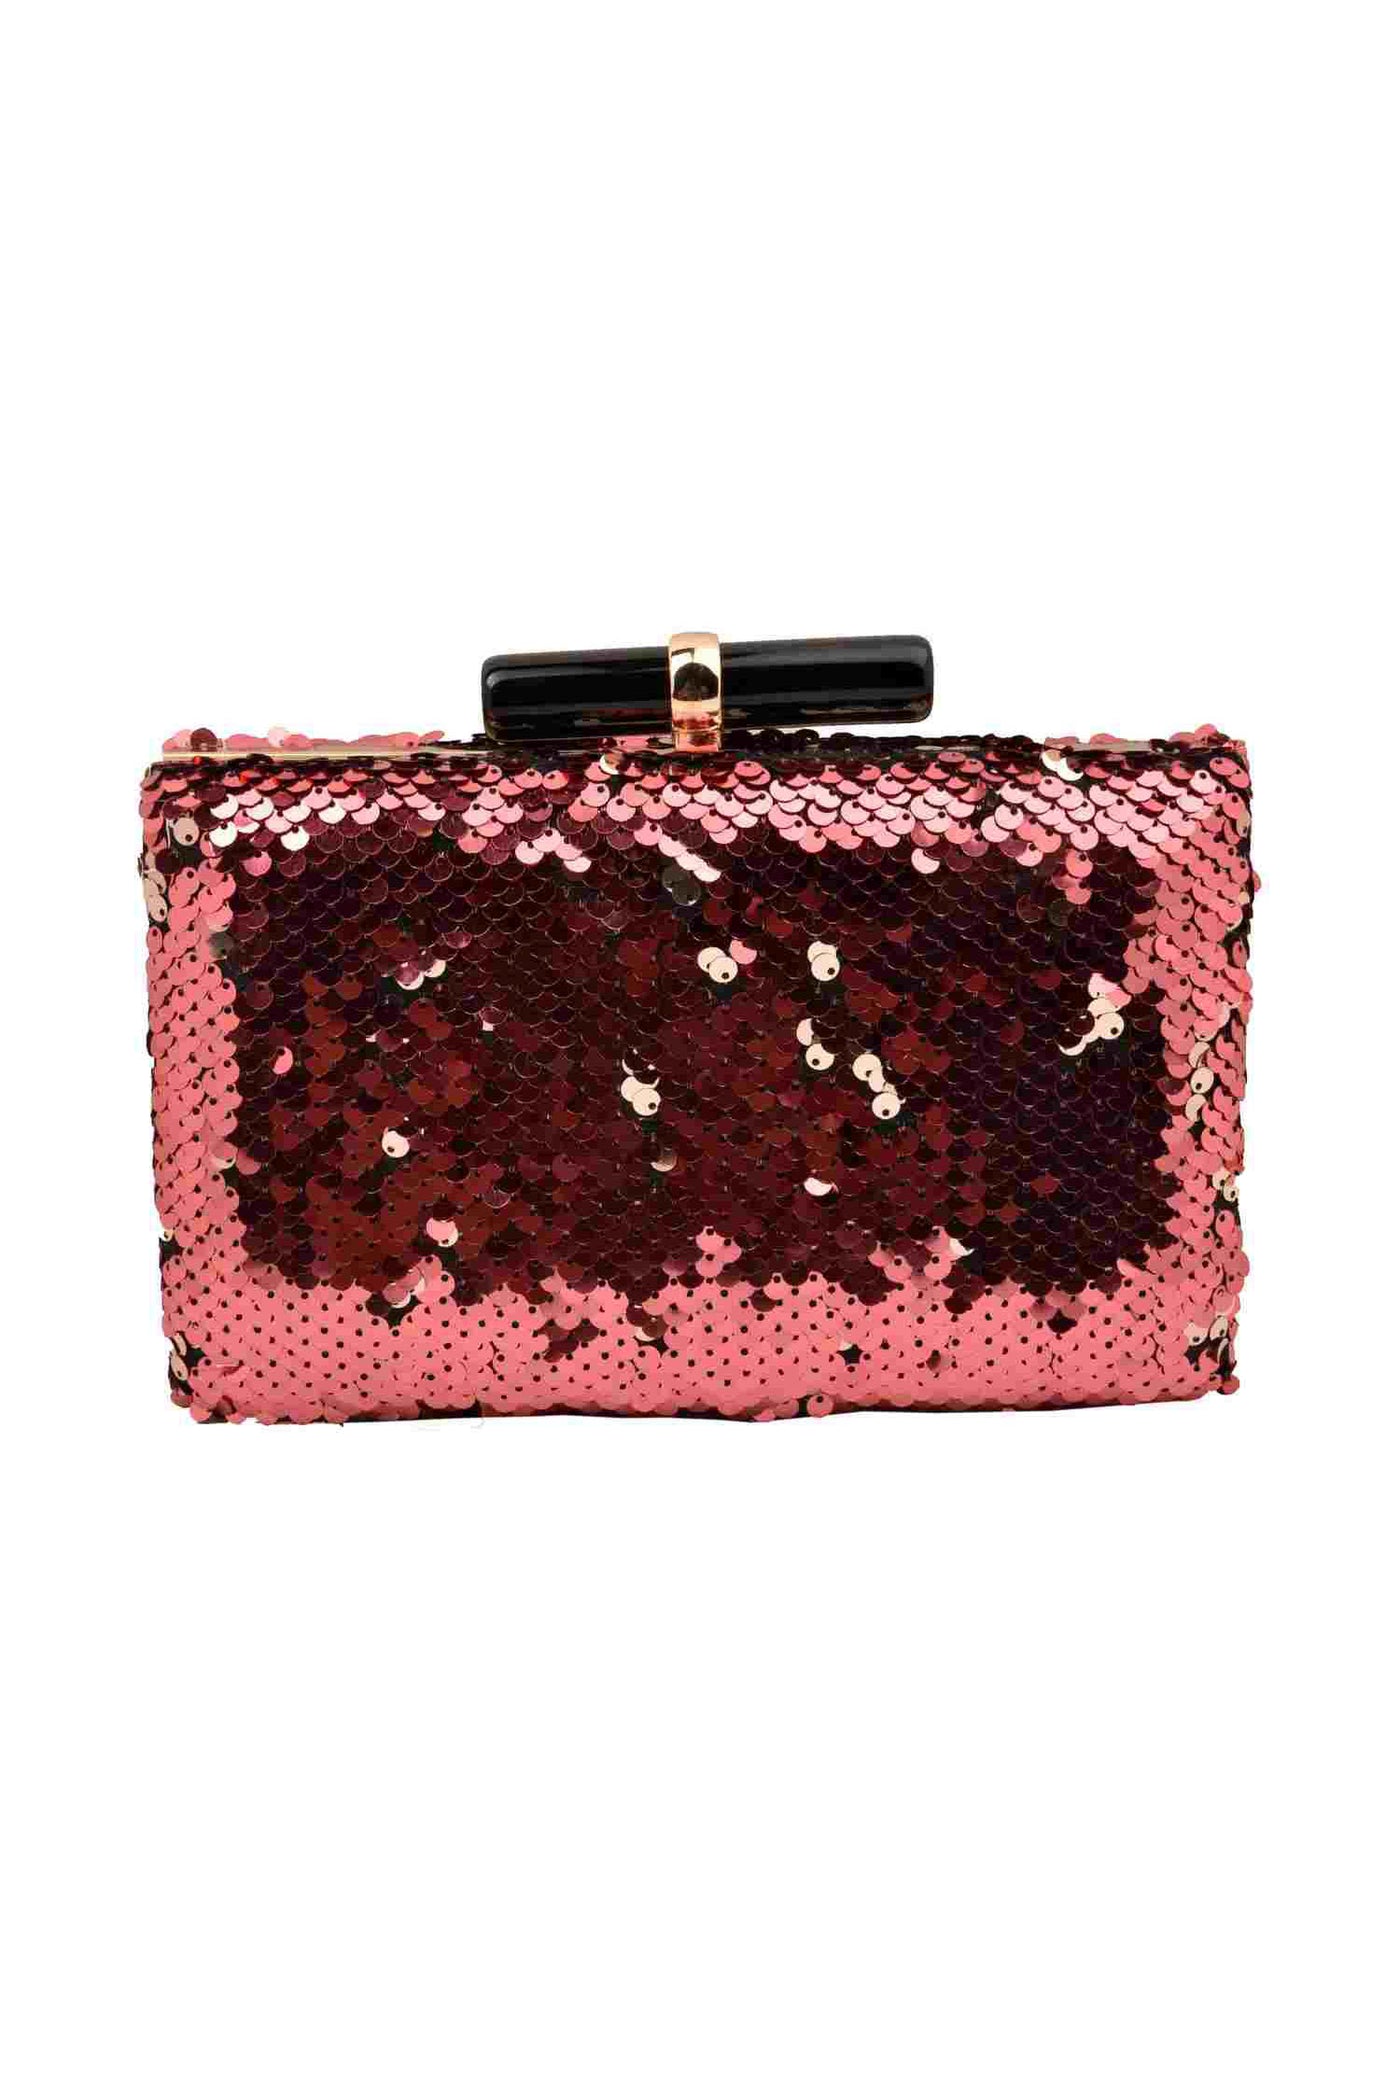 Wine and Gold Sequins Party Clutch.